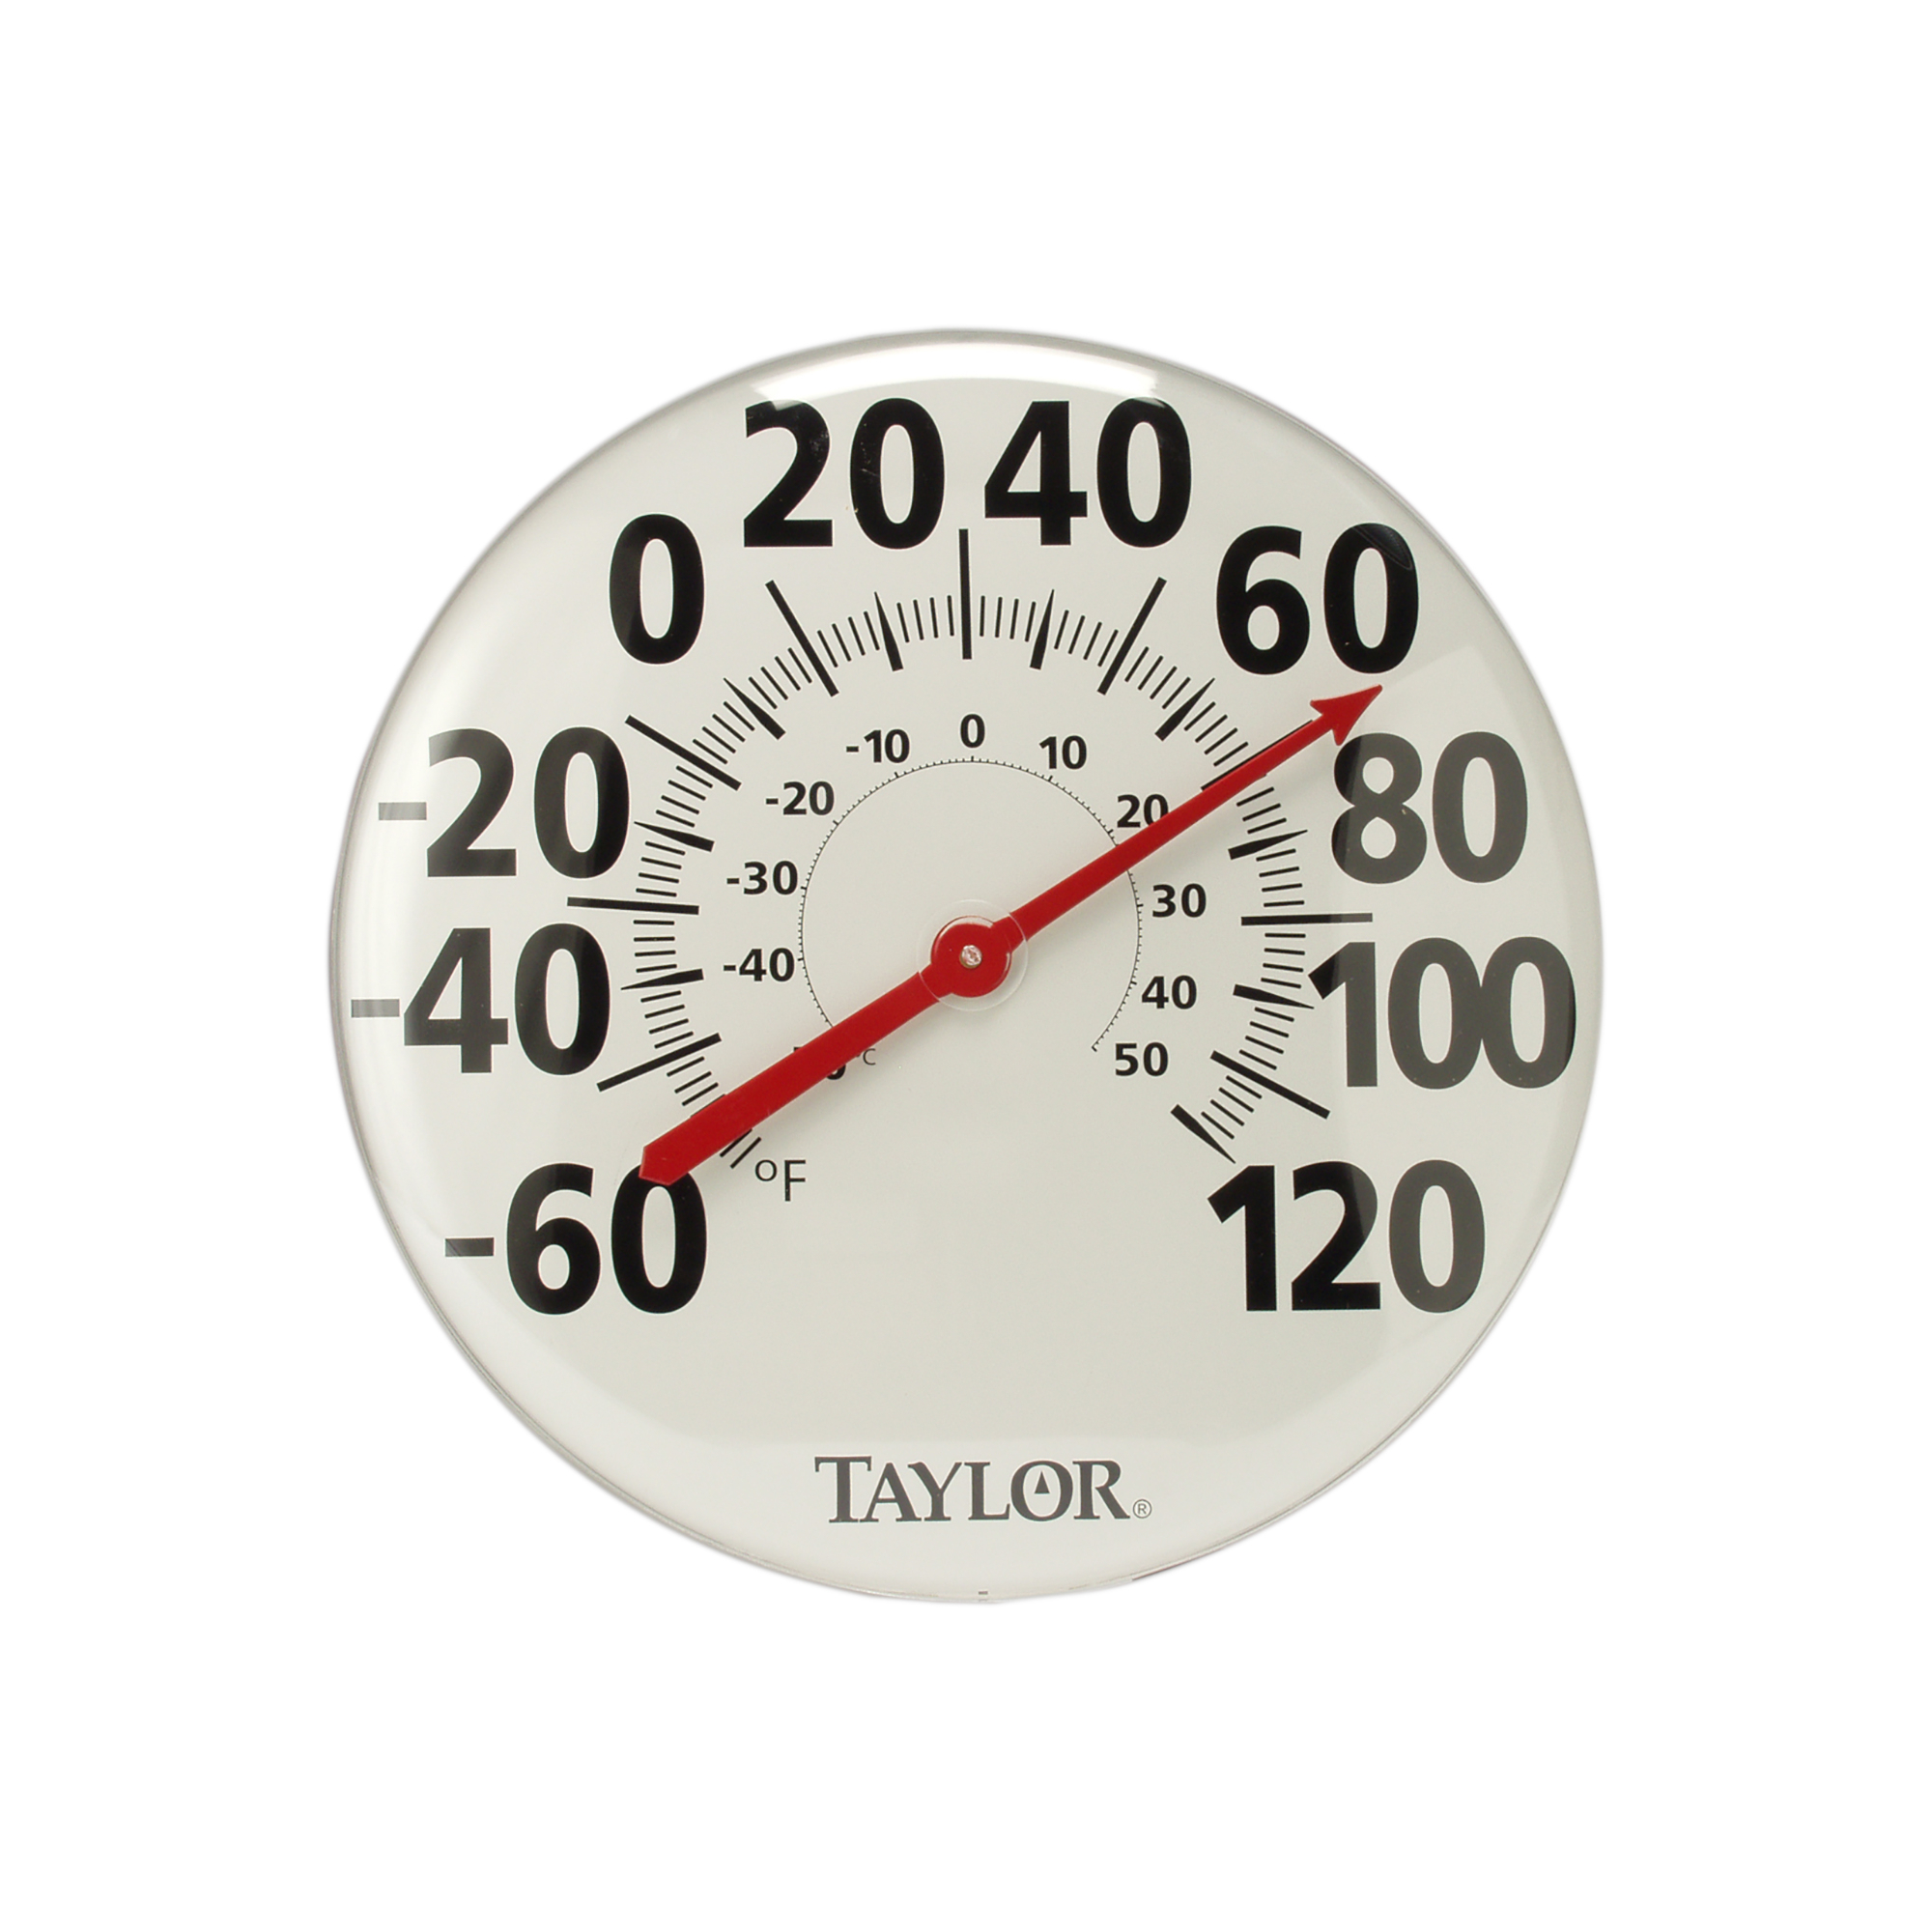 https://foter.com/photos/title/large-outdoor-thermometers.jpg